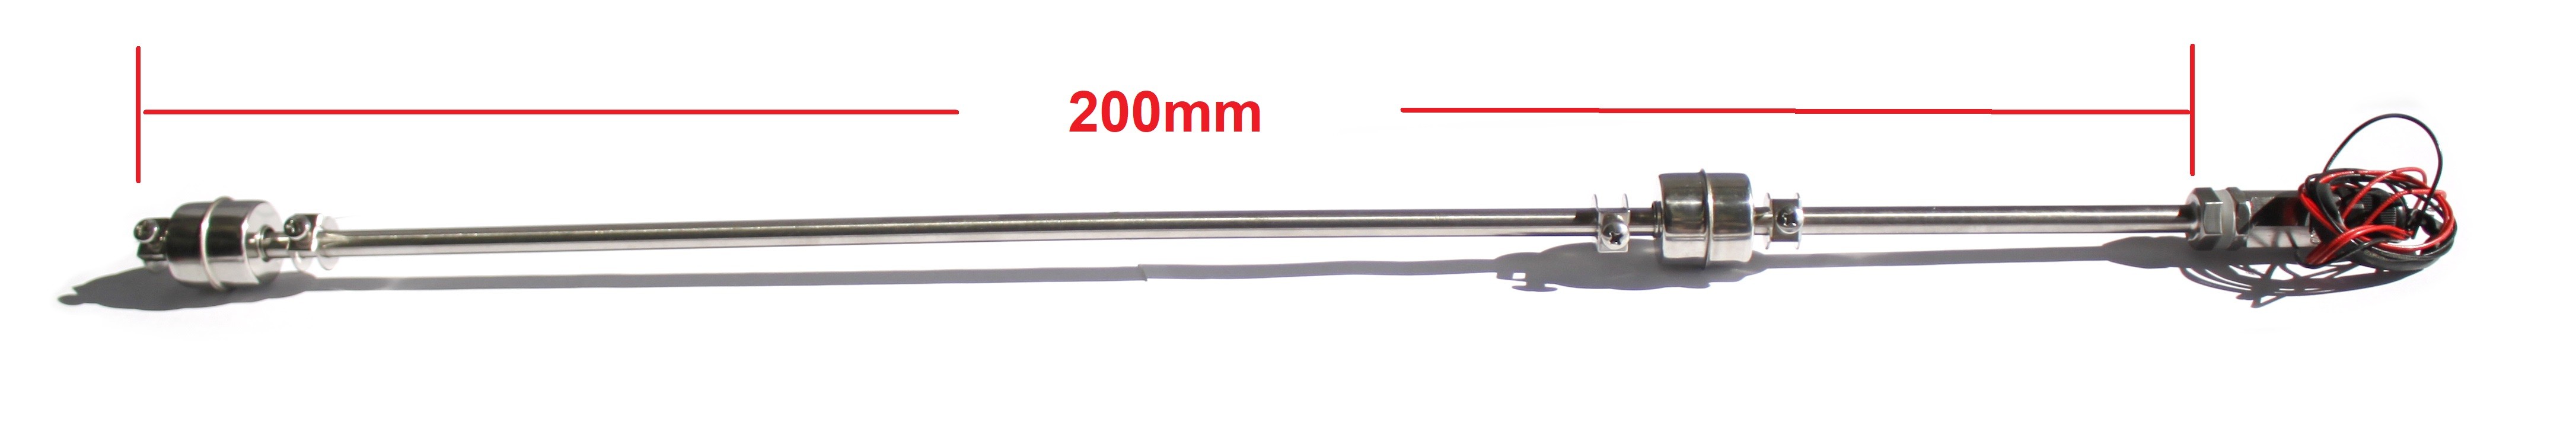 Adjustable Vertically Mounted 200mm Dual Float Switch